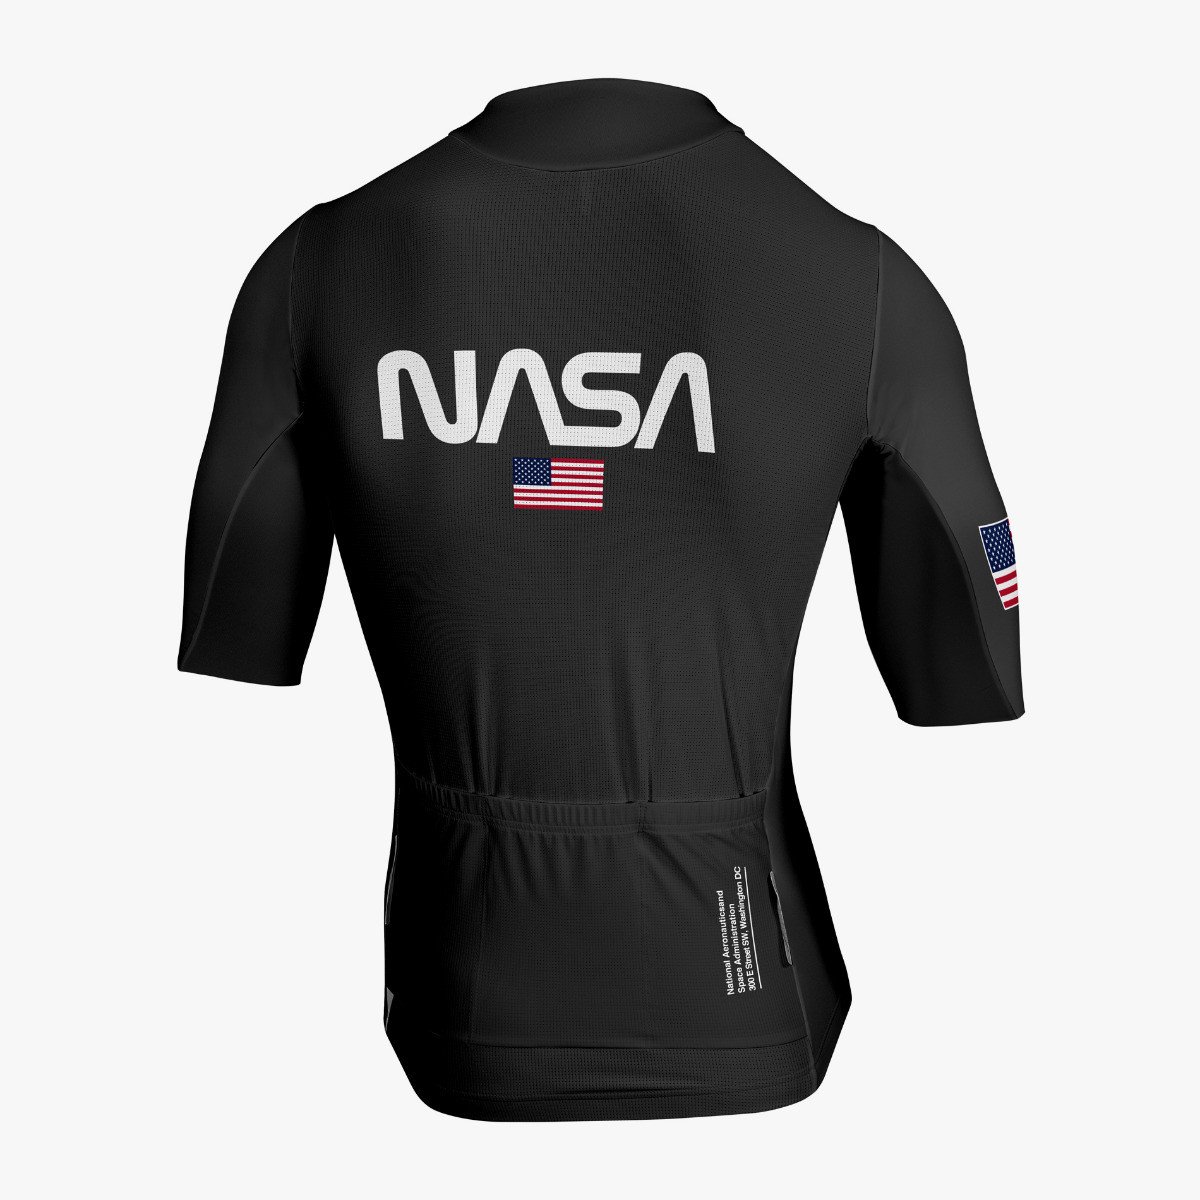 space agency collection cycling clothing jersey nasa 04